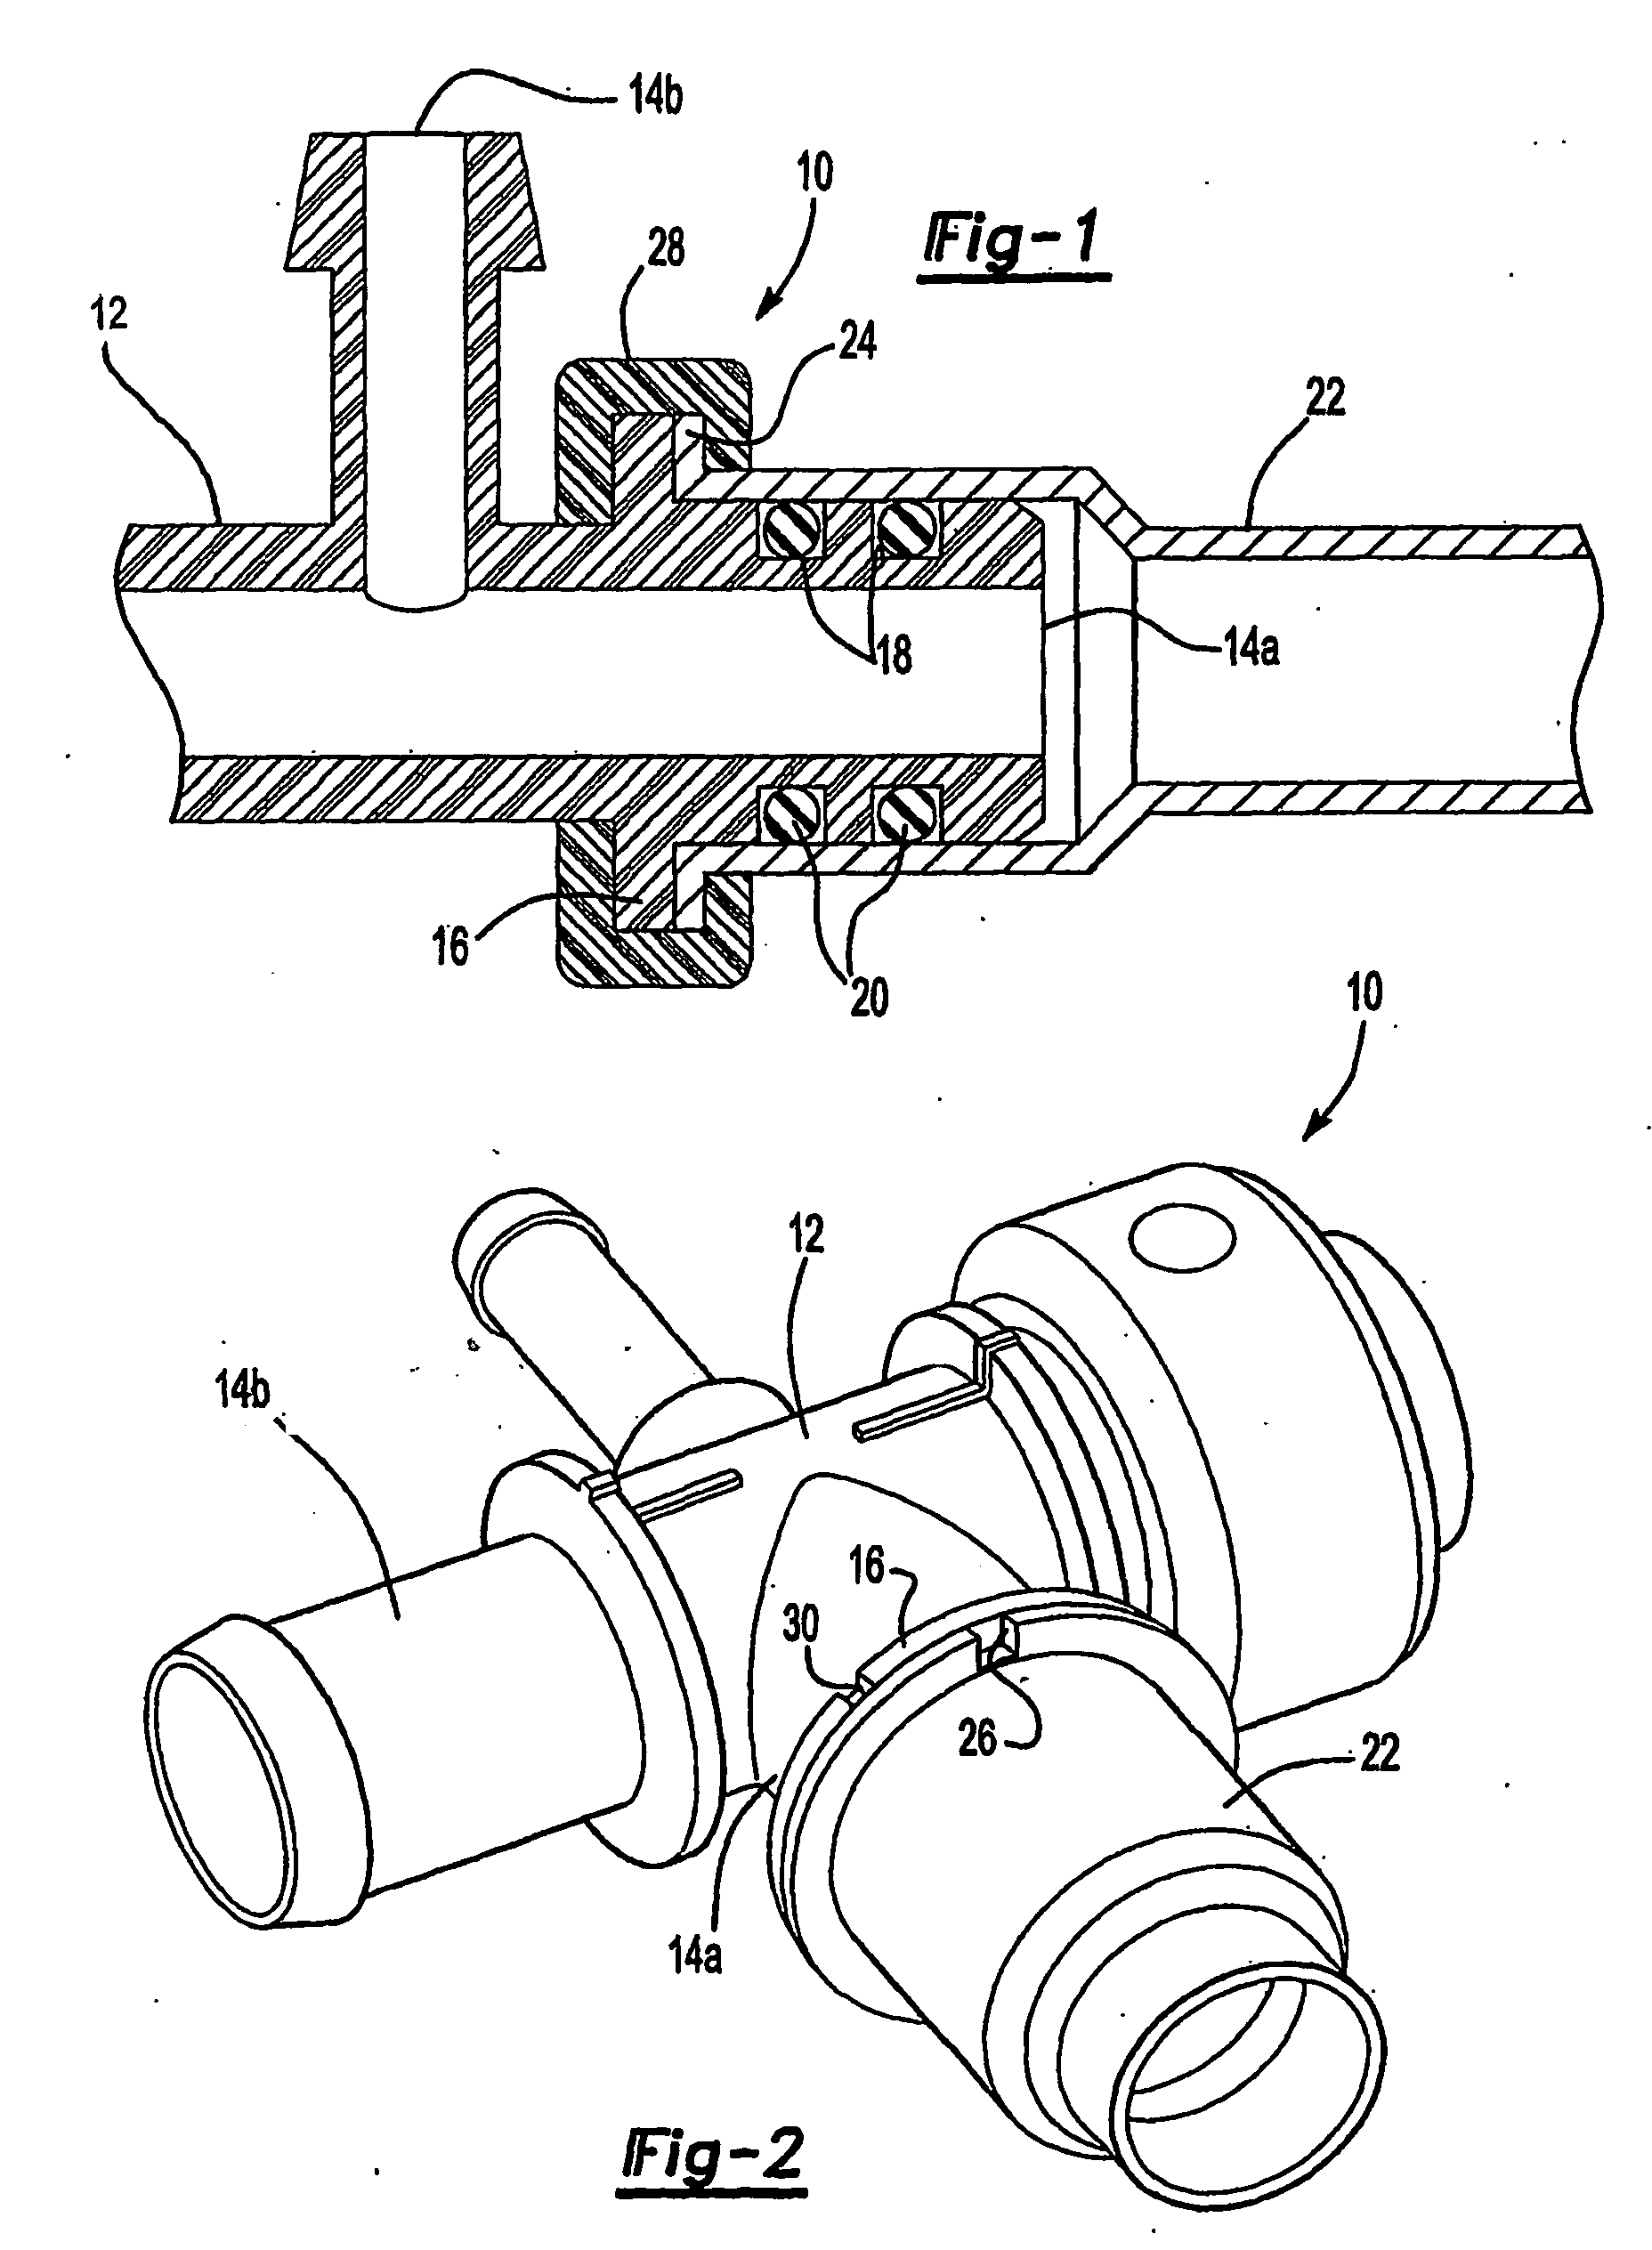 Metal to plastic fluid connection with overmolded anti-rotation retainer